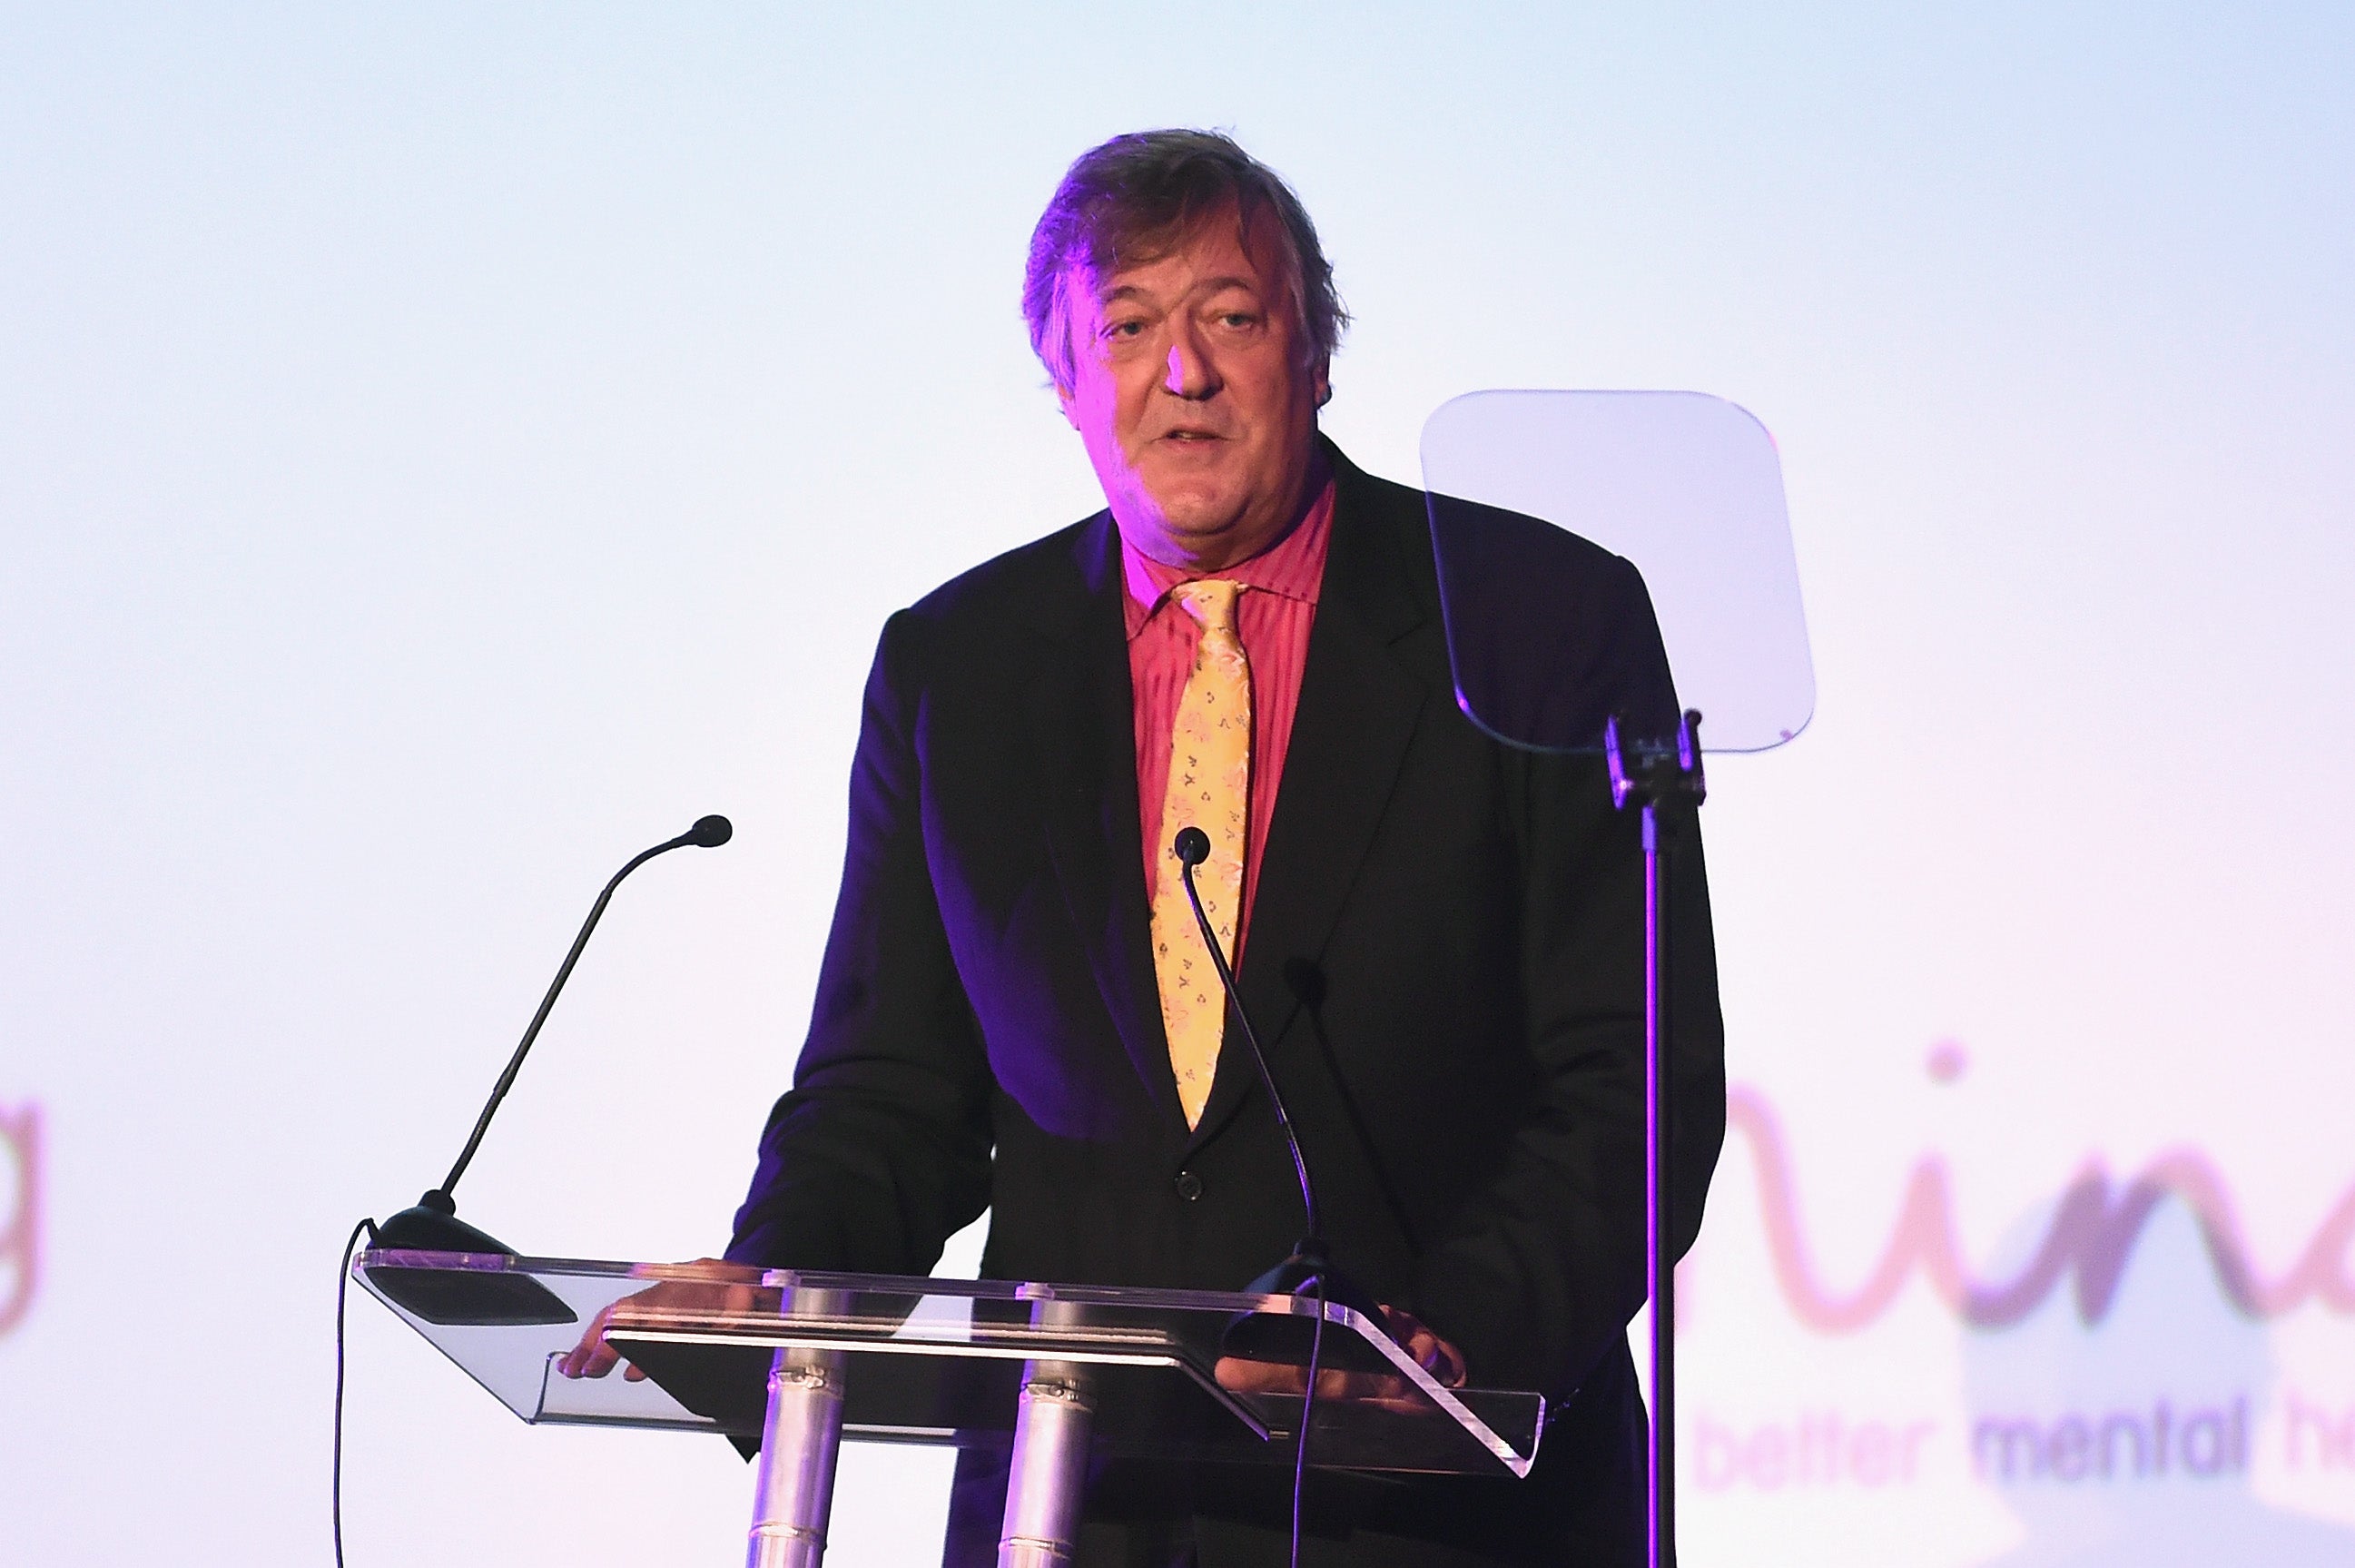 Stephen Fry is currently the president of Mind